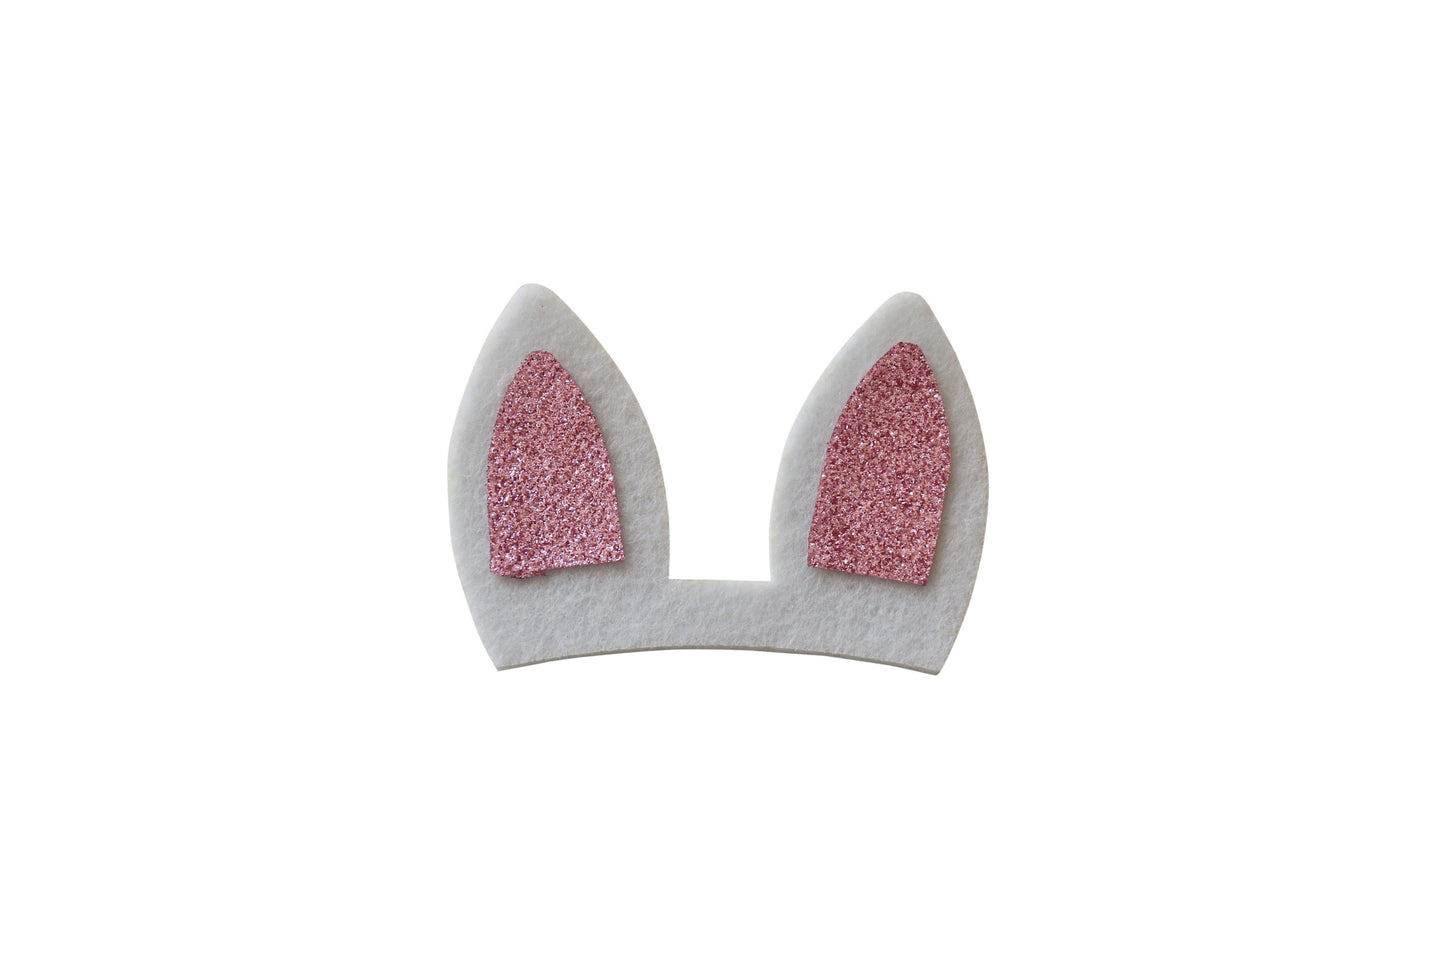 Connected Felt Bunny/Unicorn Glitter Ears - Pretty in Pink Supply